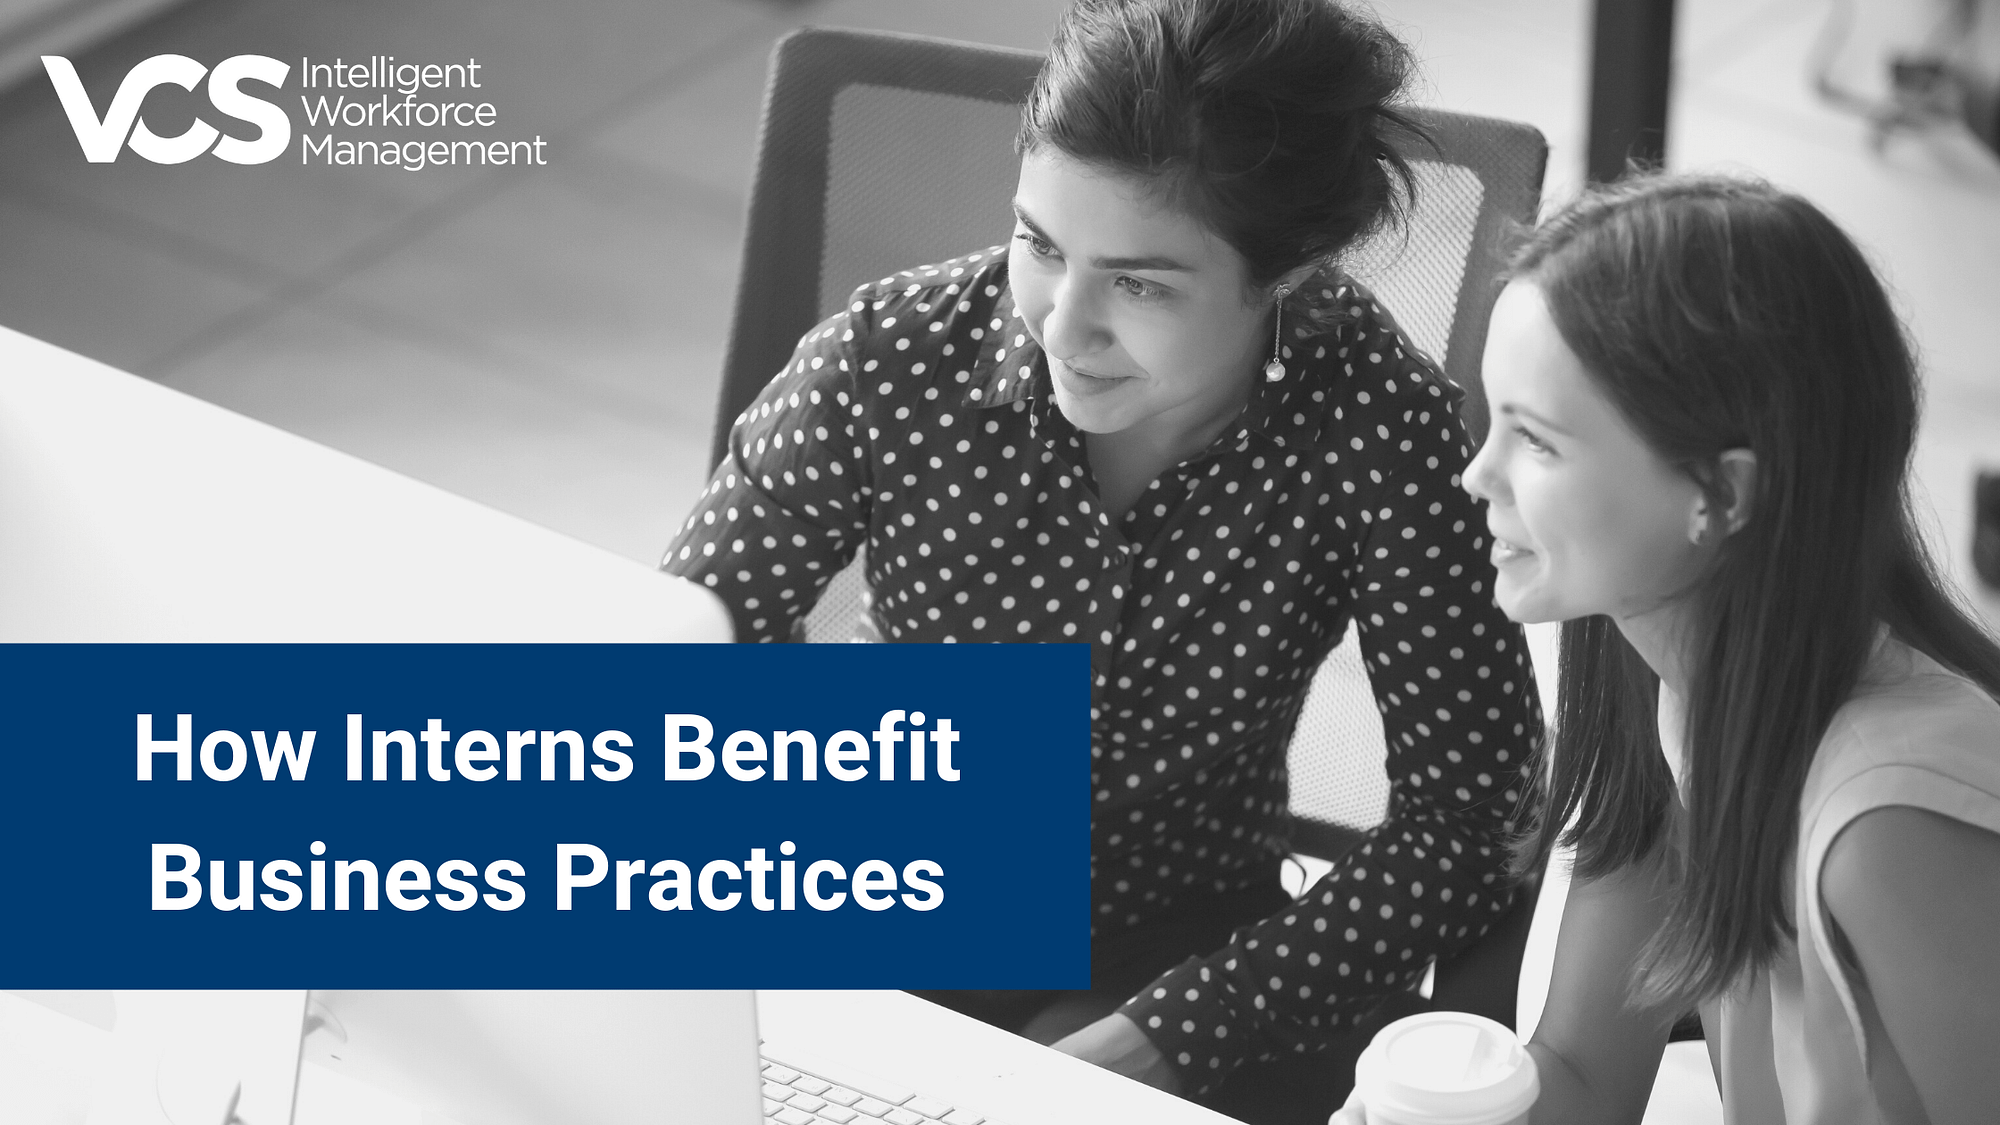 How Interns Benefit Business Practices